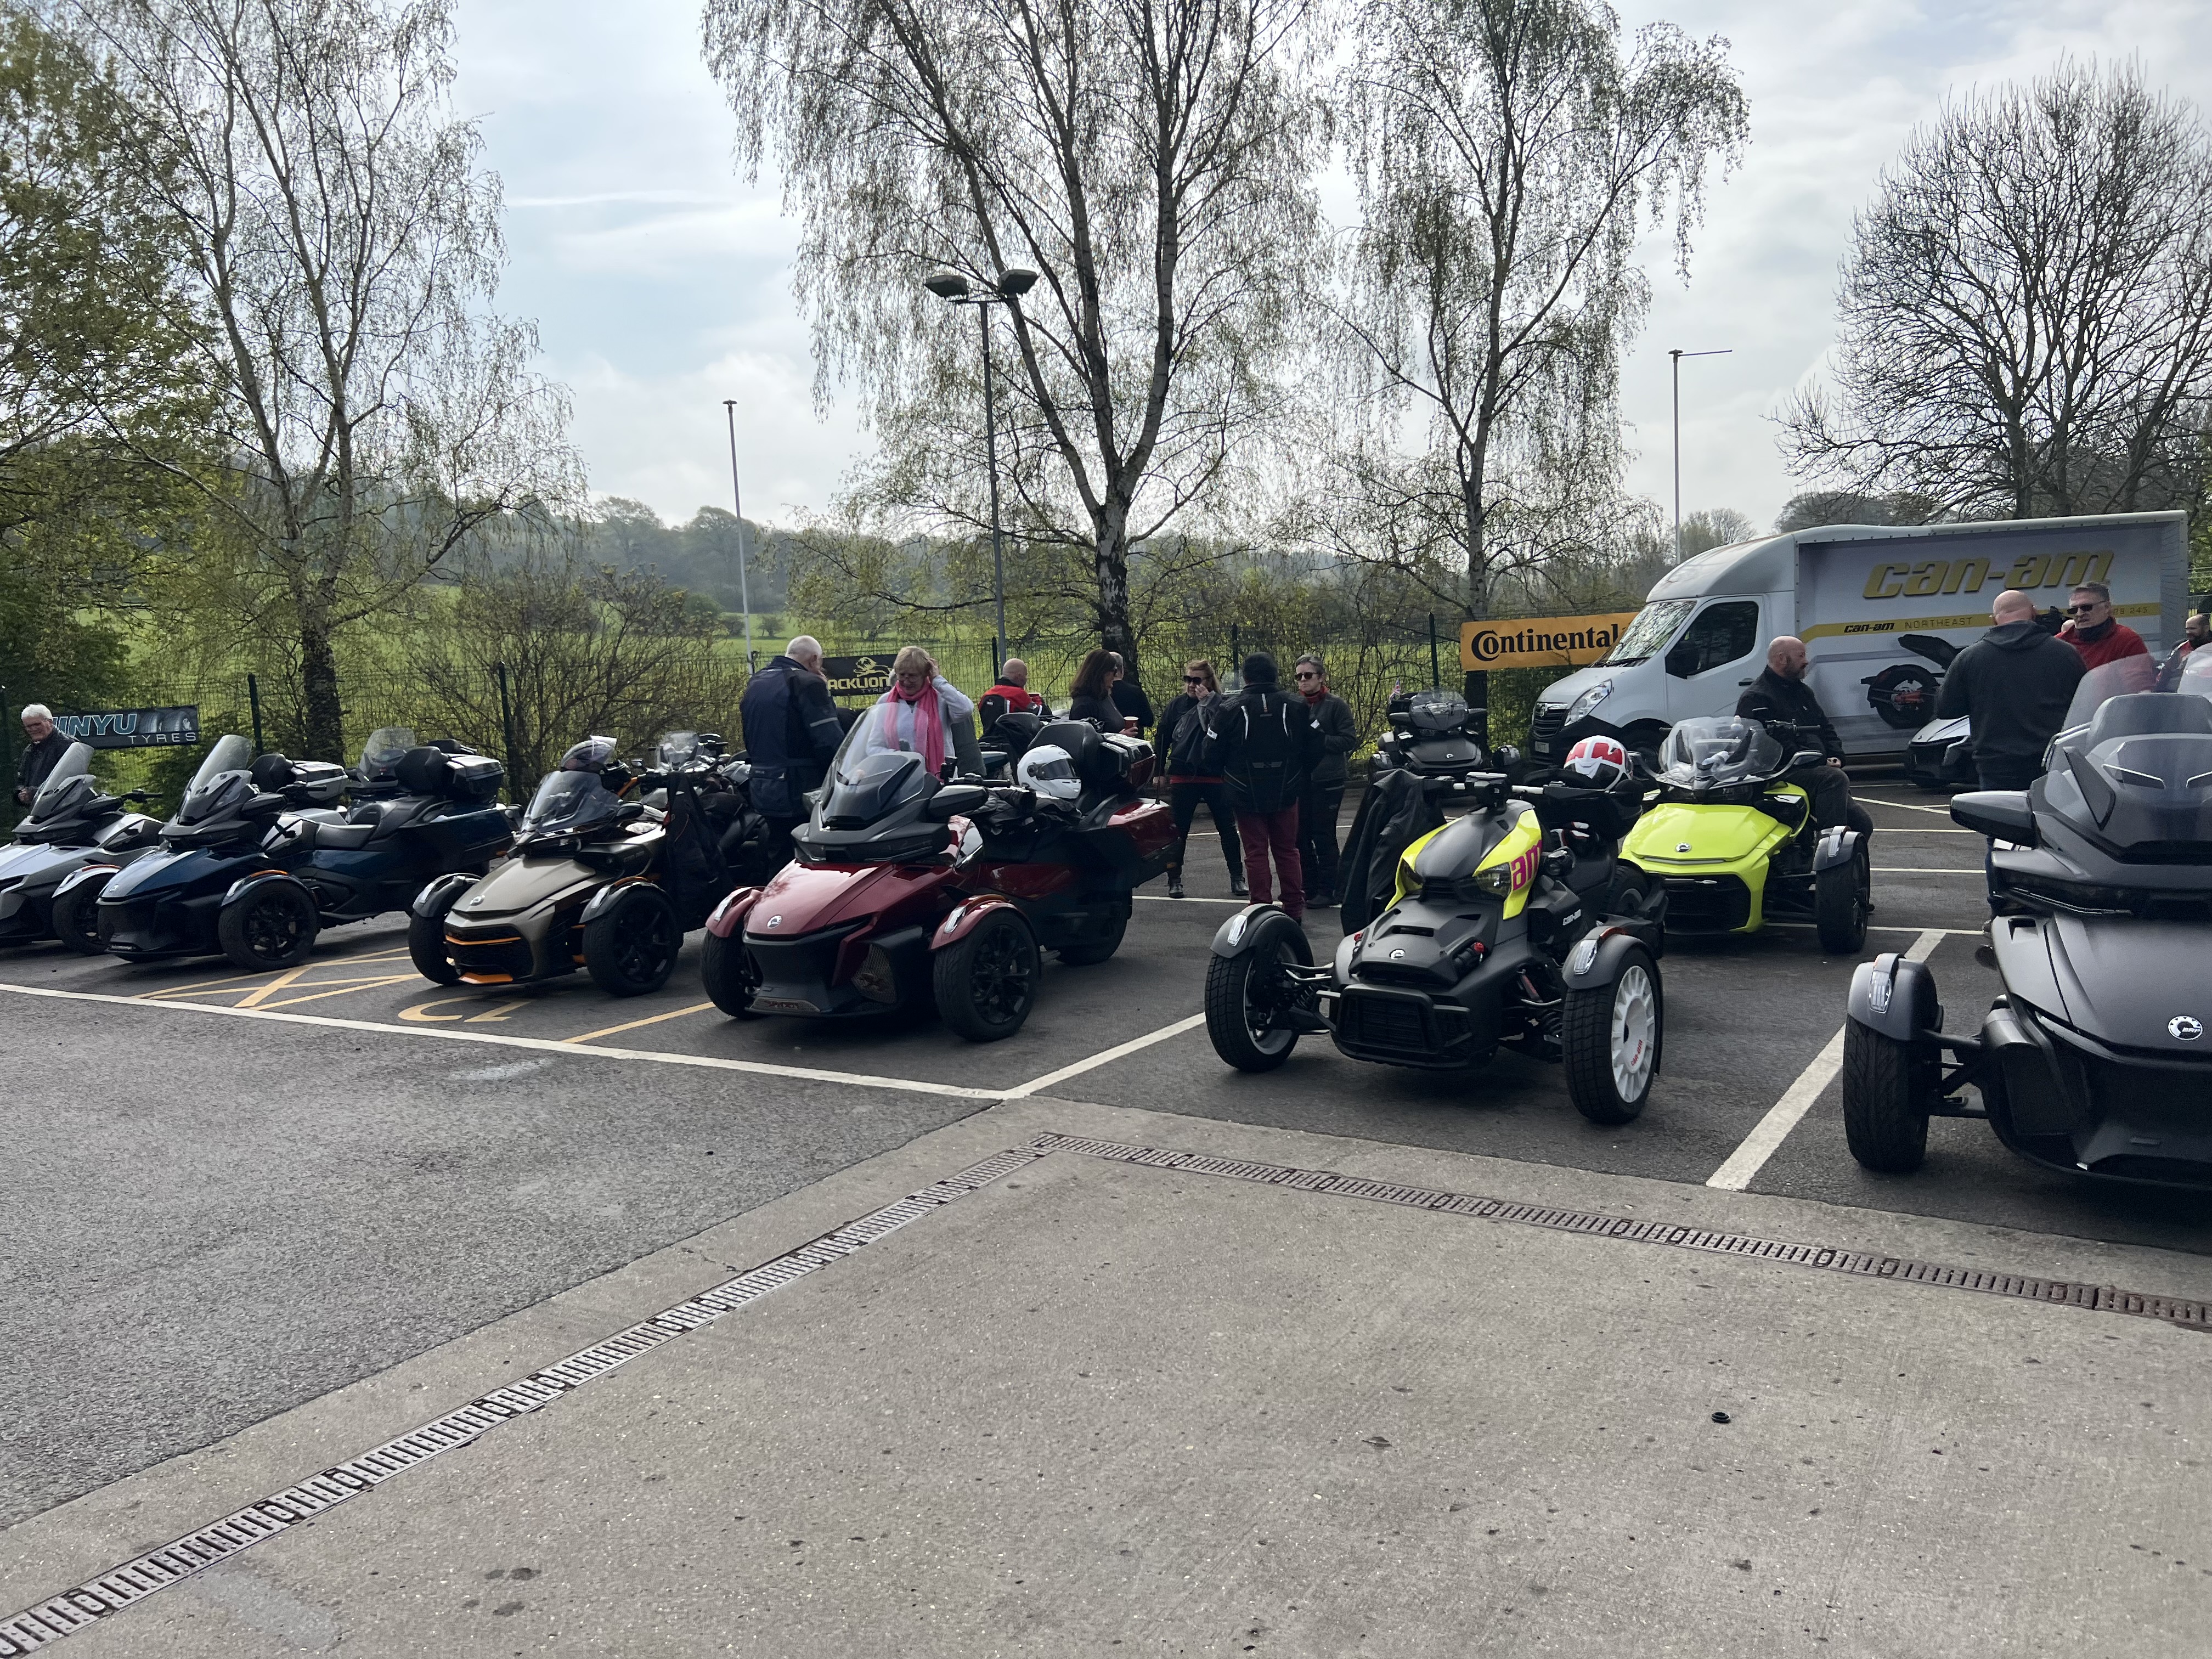 Join us for one of our customer rides